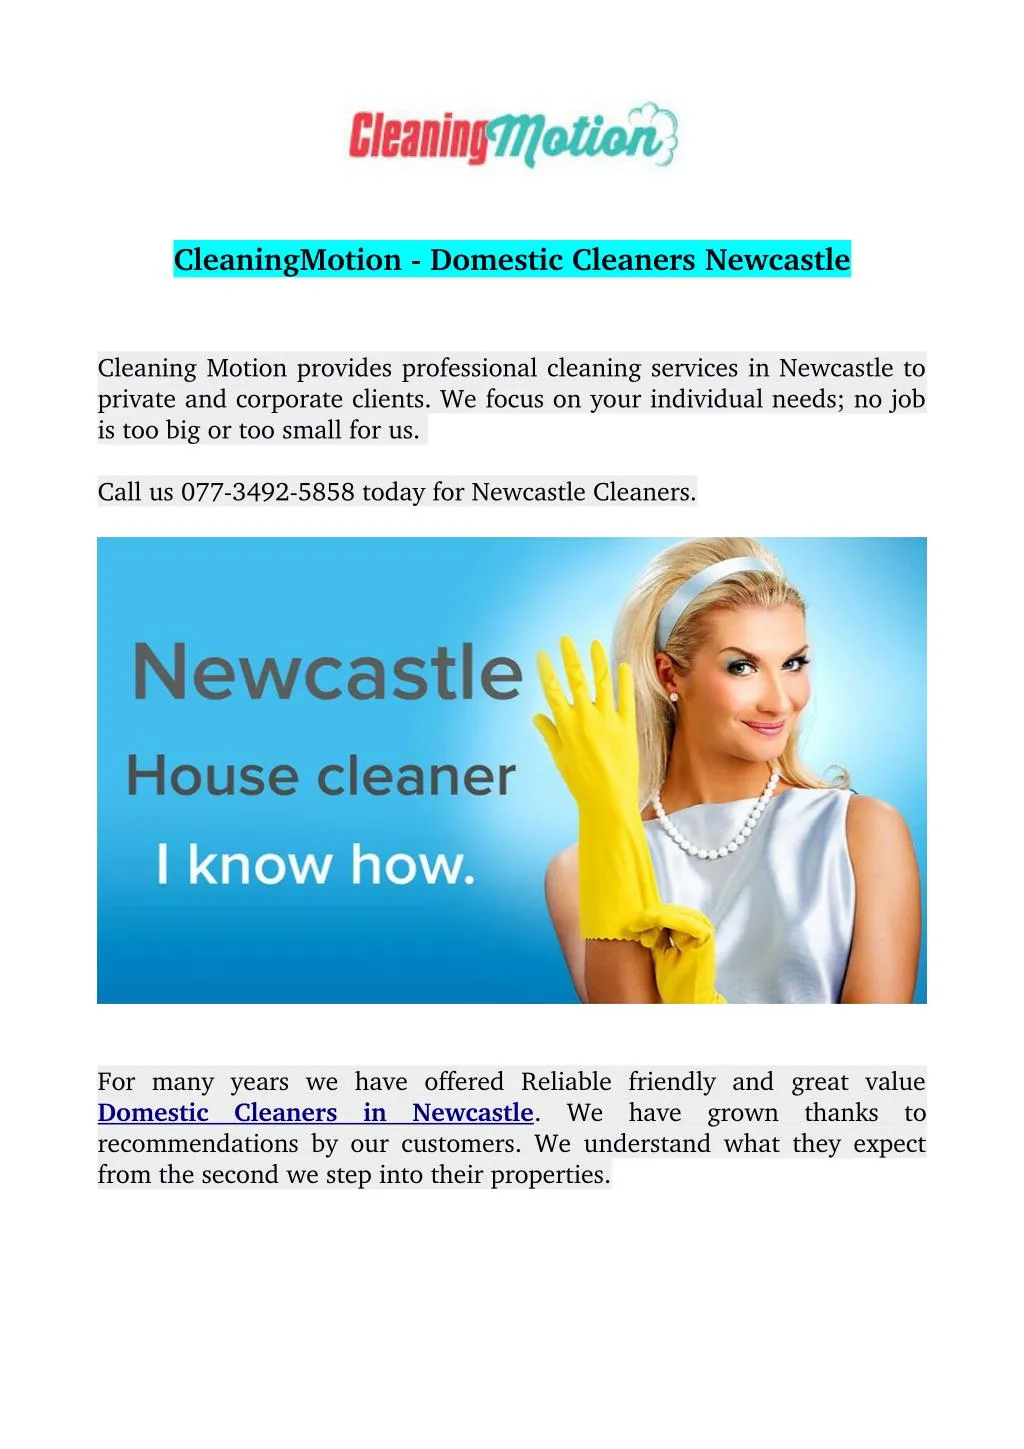 cleaningmotion domestic cleaners newcastle